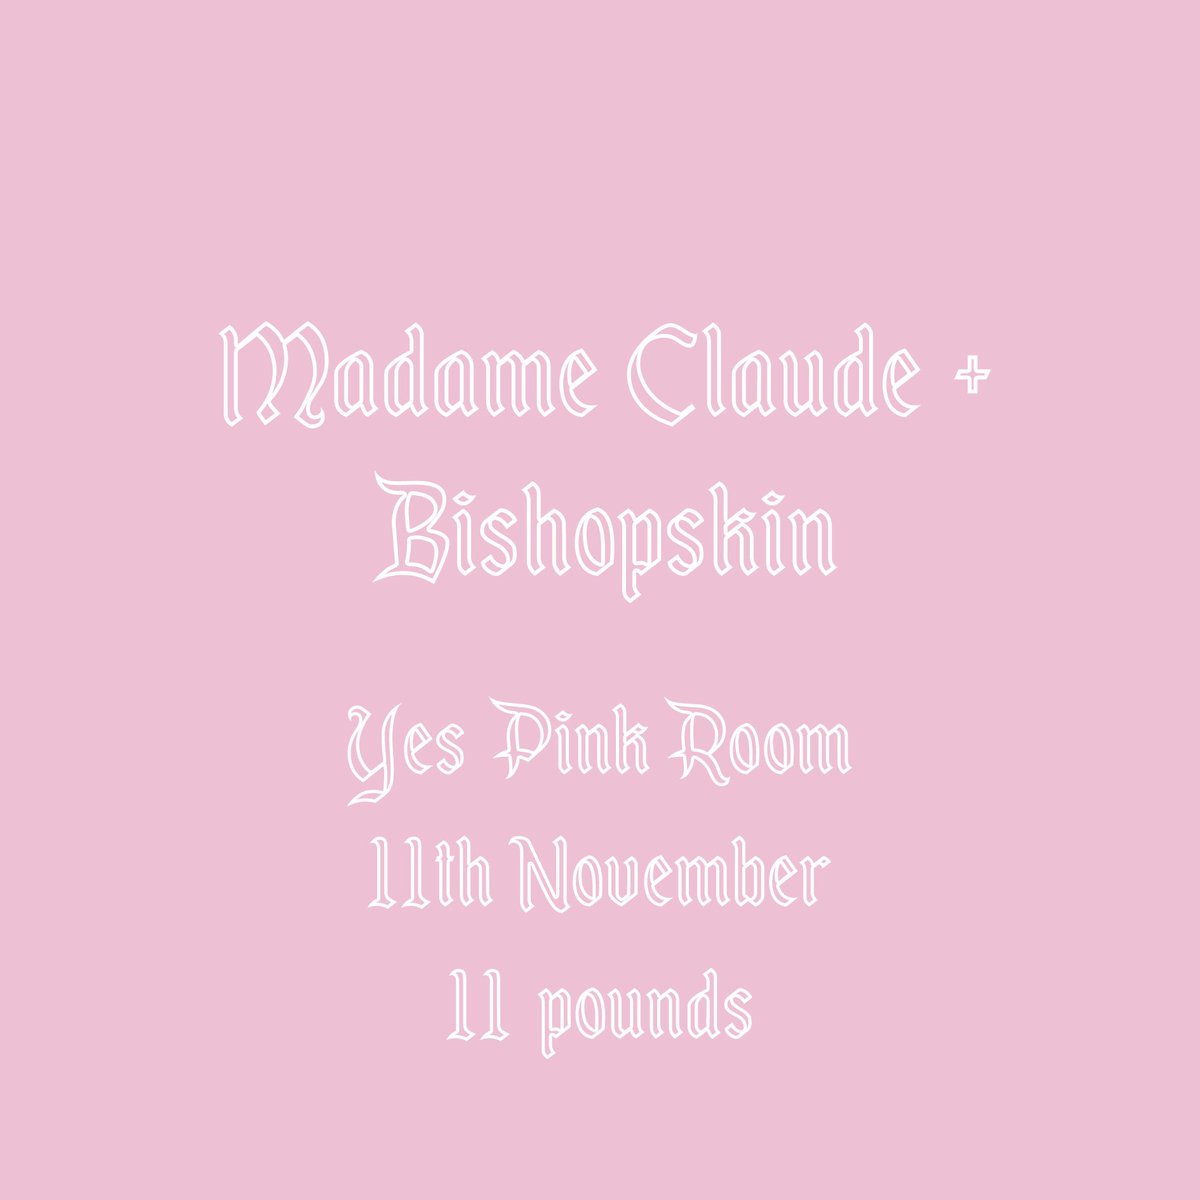 NEW SHOW

We’re very excited to announce @MadameClaude__ ‘s biggest headline show to date! Support comes from the fantastic @BishopskinBand doing their first ever Manchester show !!

Our first in the pink room too! 

Tickets on sale on Friday at 10am